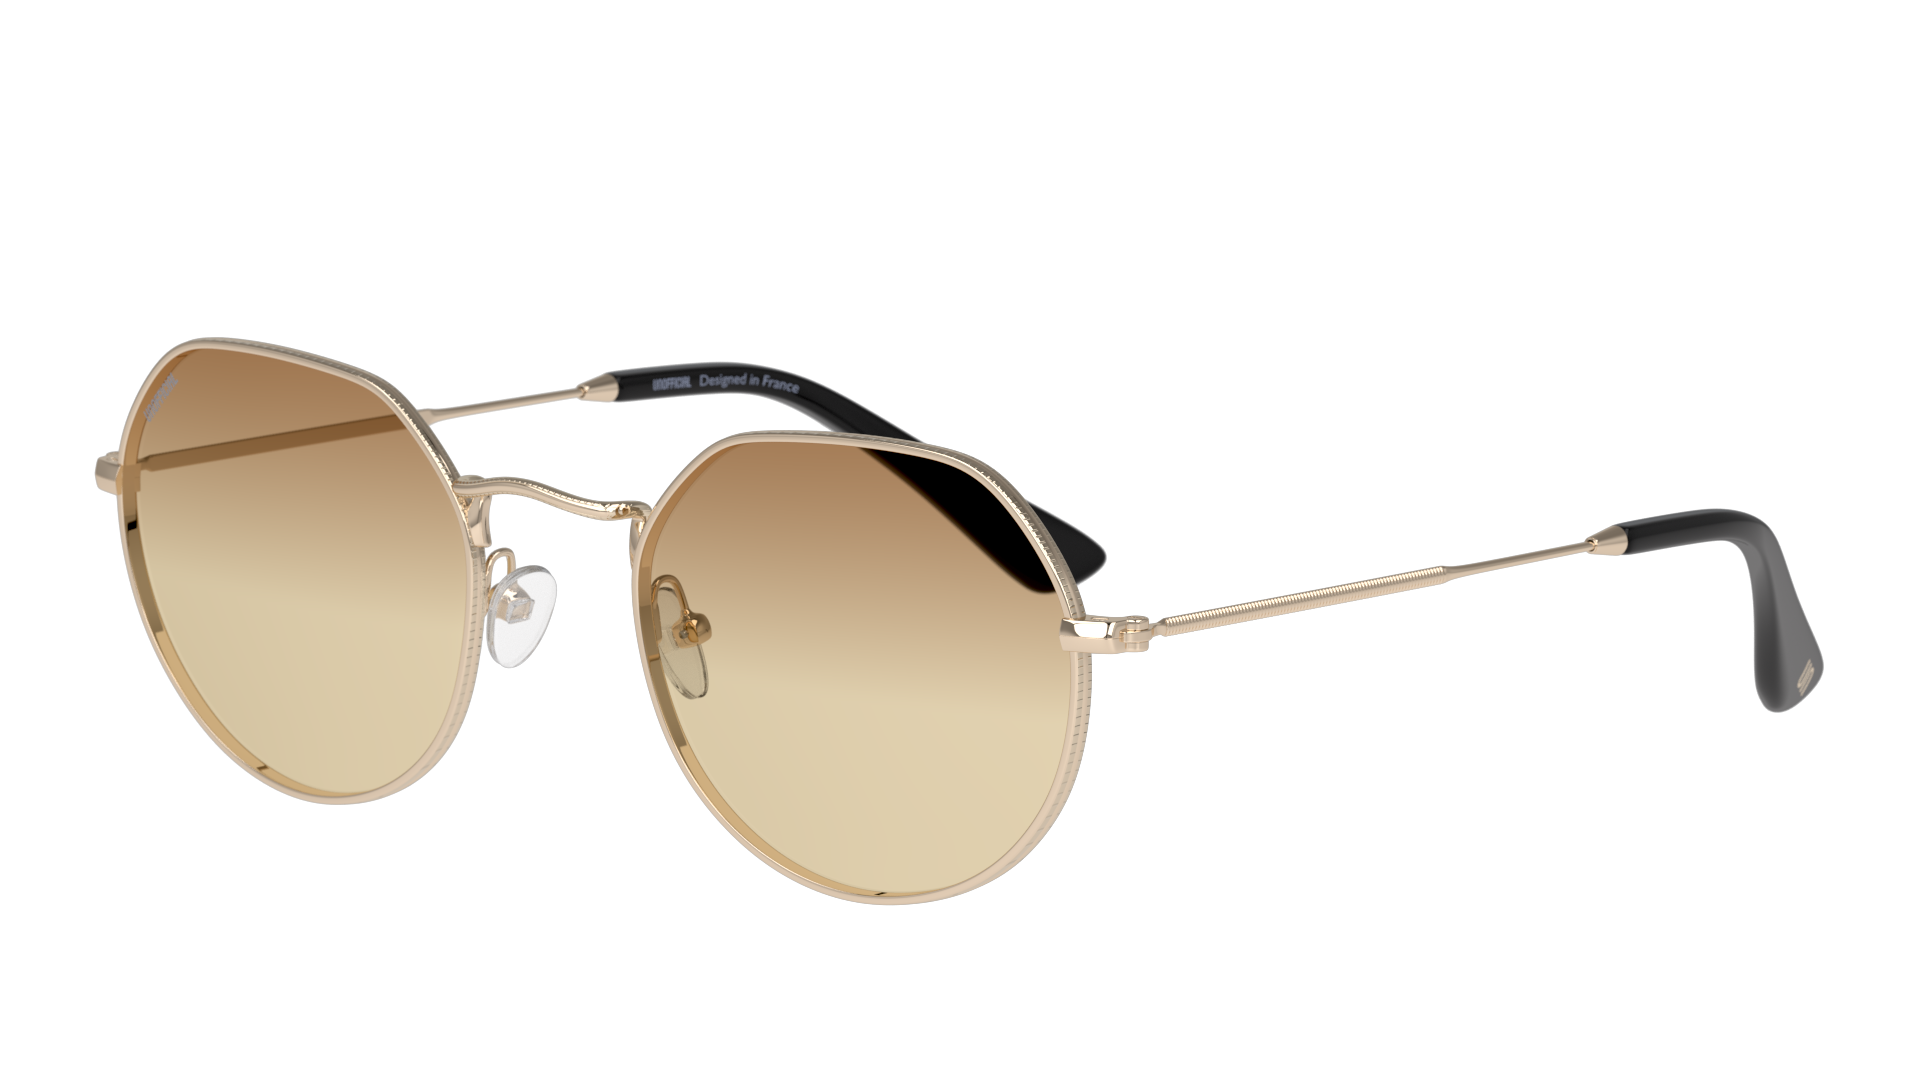 Angle_Left01 Unofficial UNSU0103 Sunglasses Brown / Gold